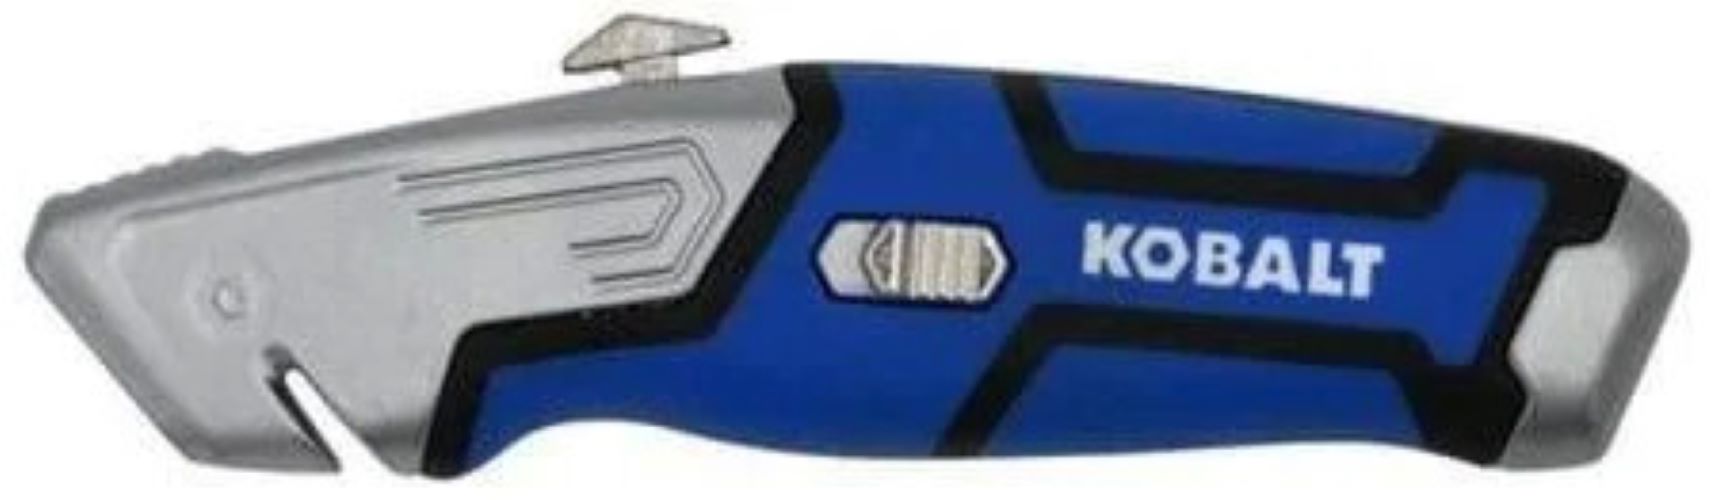 Kobalt 3/4-in 3-Blade Retractable Utility Knife with On Tool Blade (Clearance) - $3.87 Lowe's YMMV